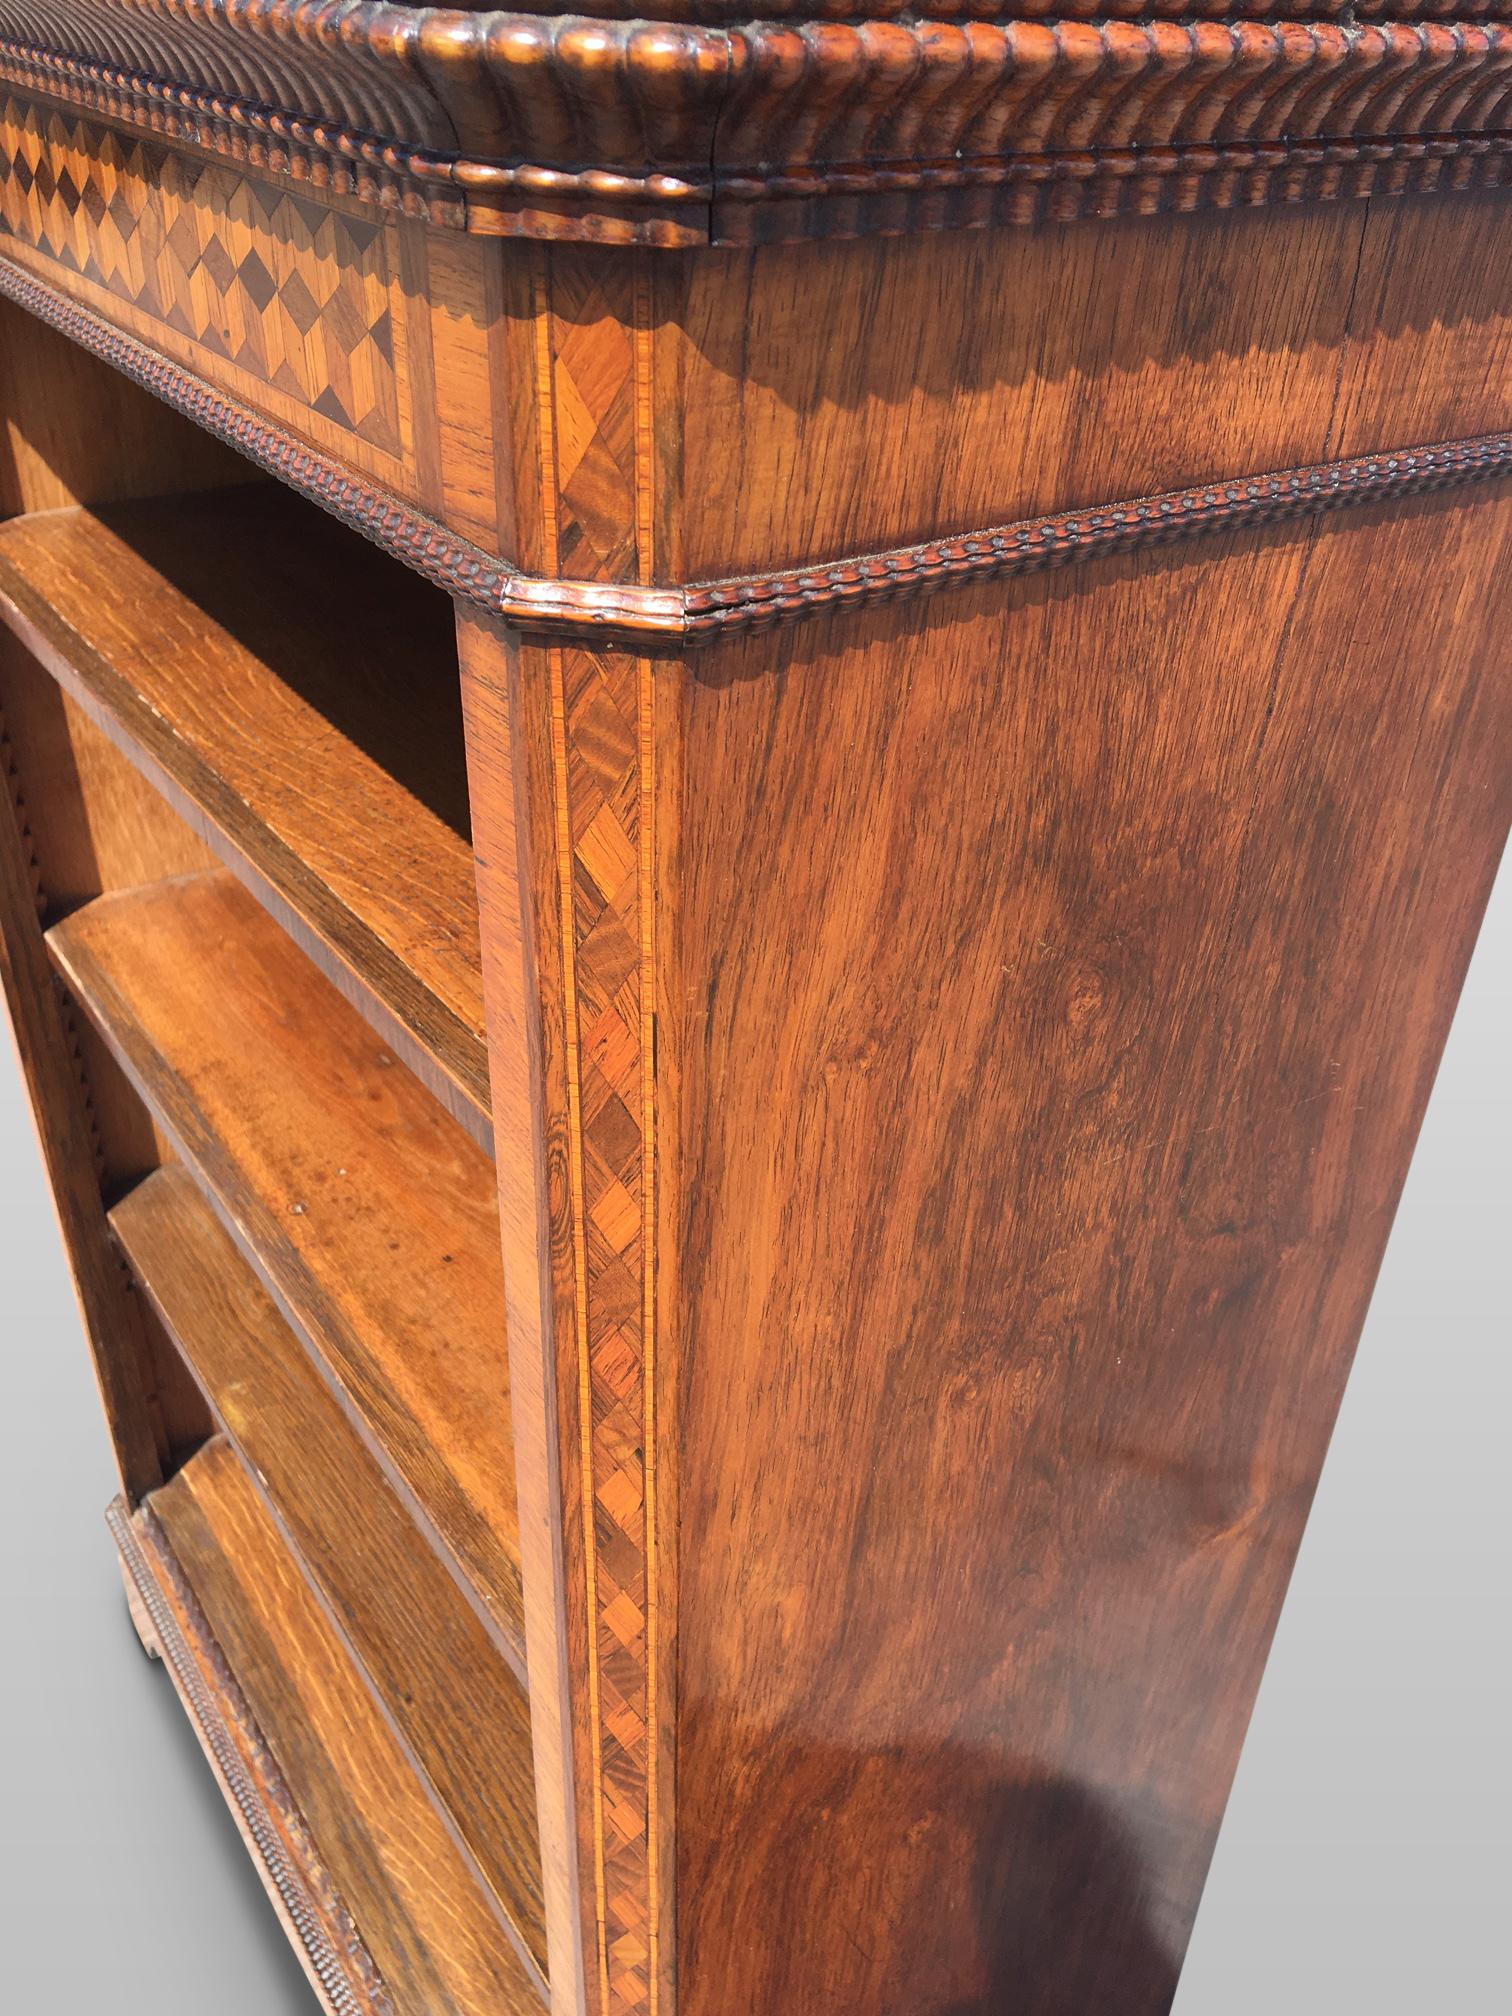 Good quality Walnut  and marquetry open bookcase, circa 1870.
This is an attractive and compact solid bookcase, with 4 shelves, 3 adjustable
and giving a maximum shelf depth of 10.5 ins.
The original mellow finish and patina are a delight. The